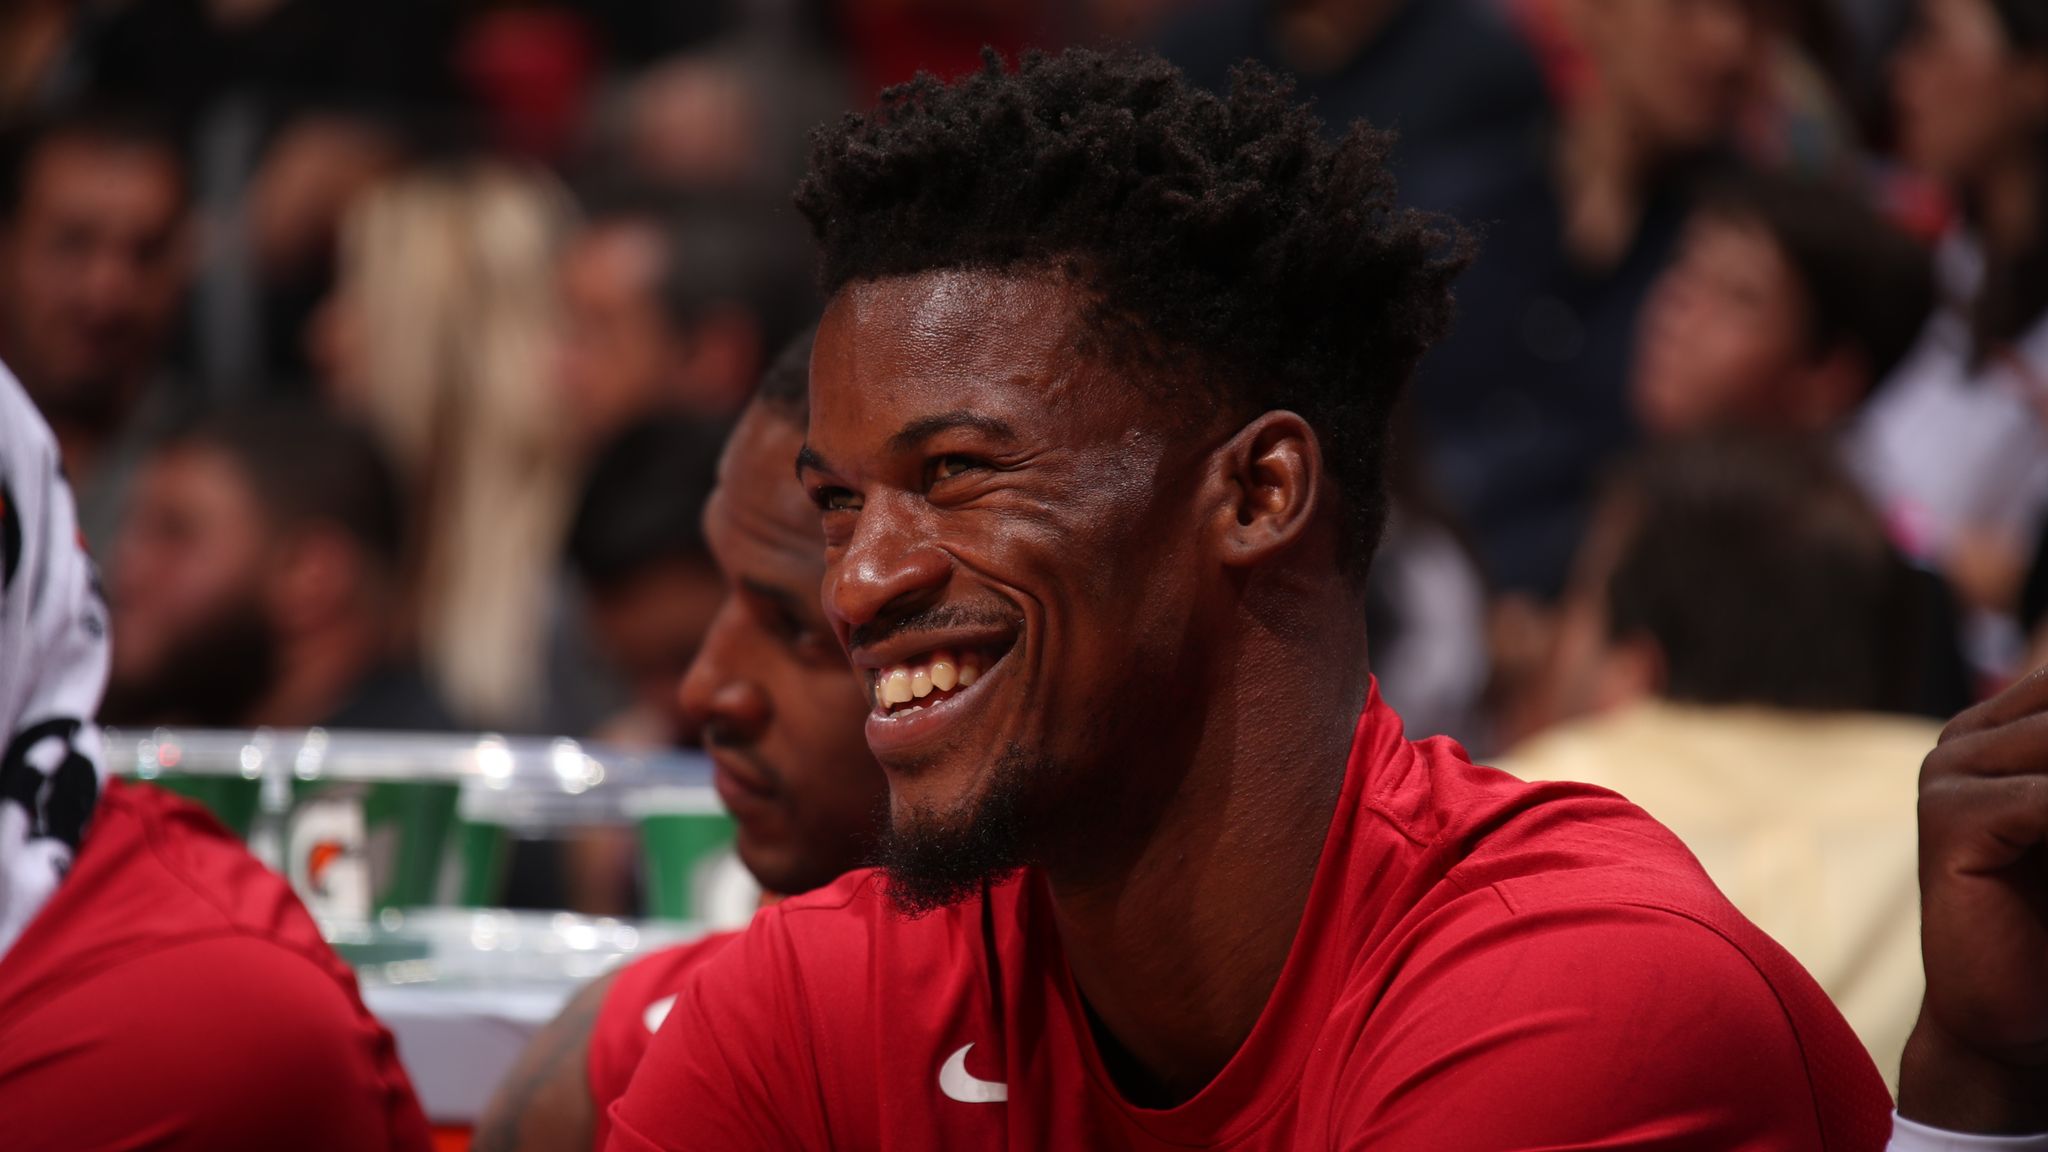 Miami Heat star Jimmy Butler has a new look and NBA Media Day musings